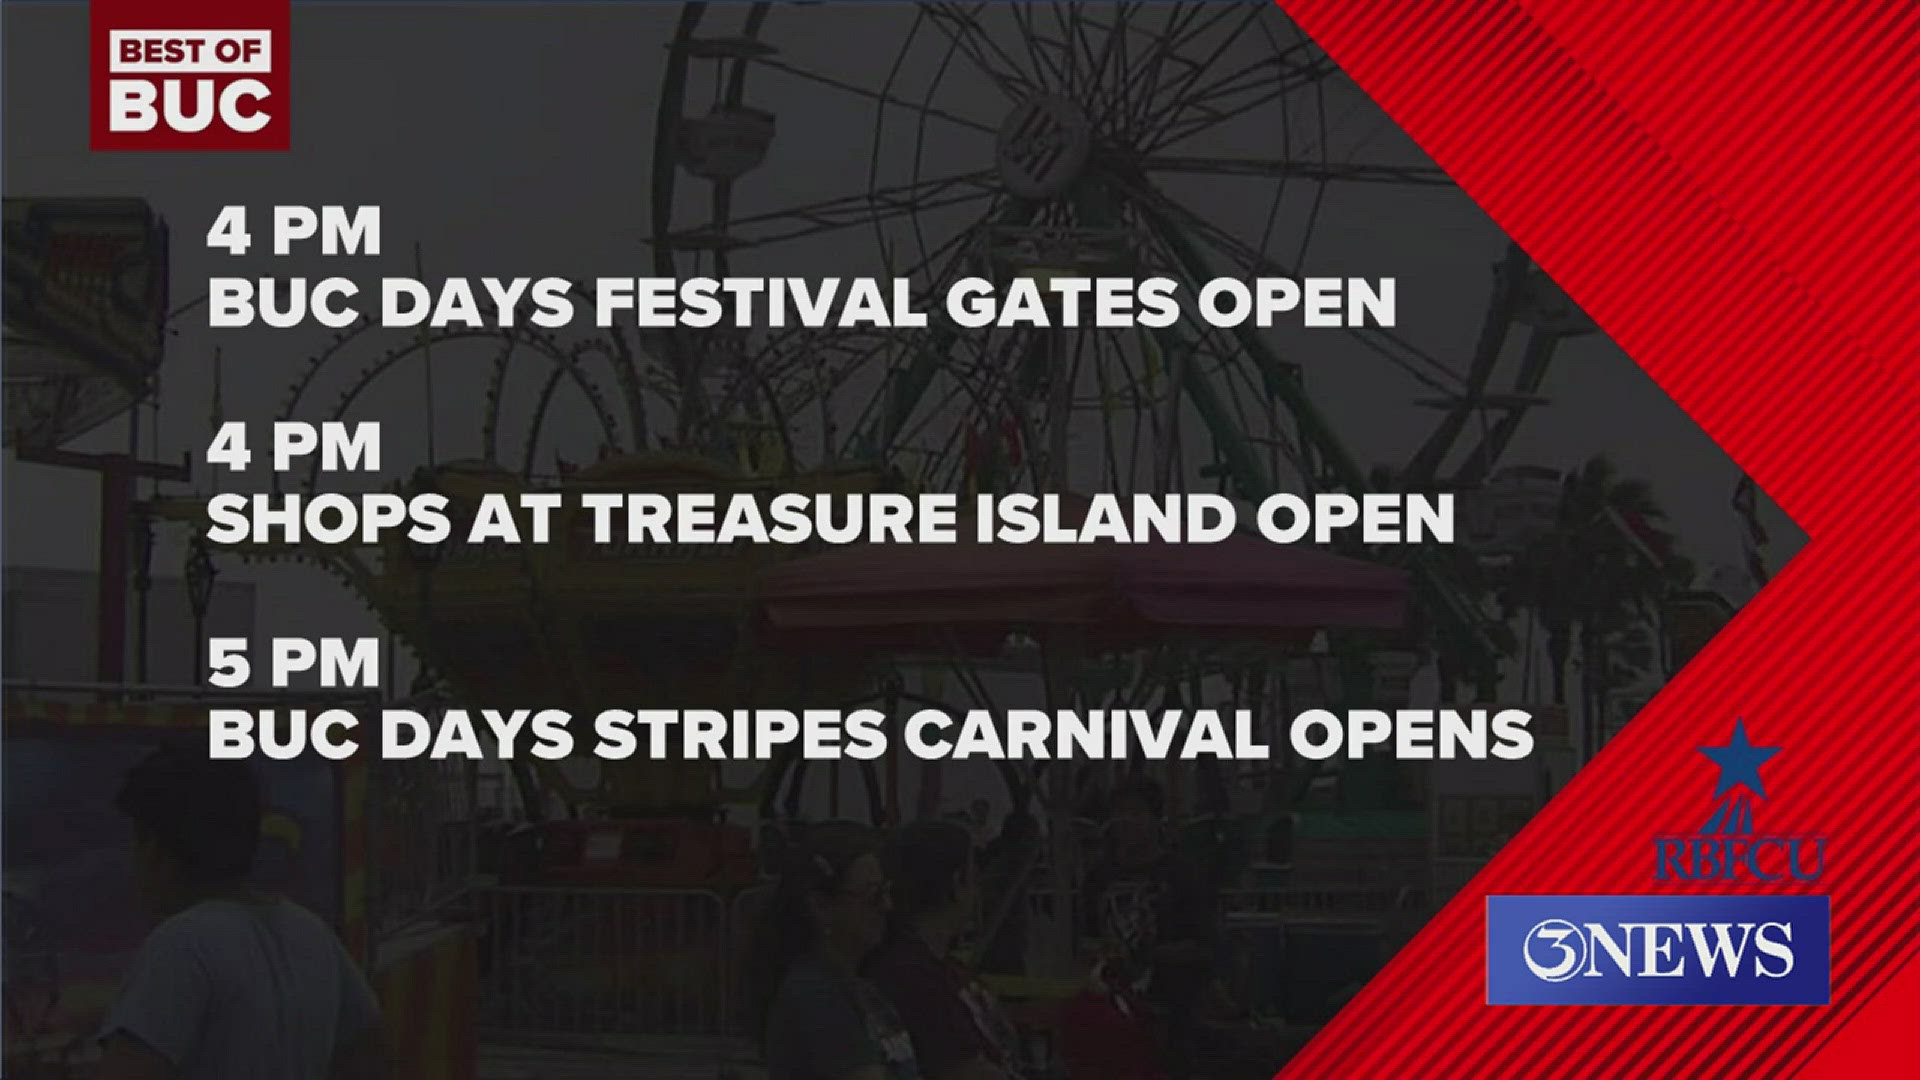 Treasure Island opens to shoppers at 4 p.m., and the carnival opens at 5.